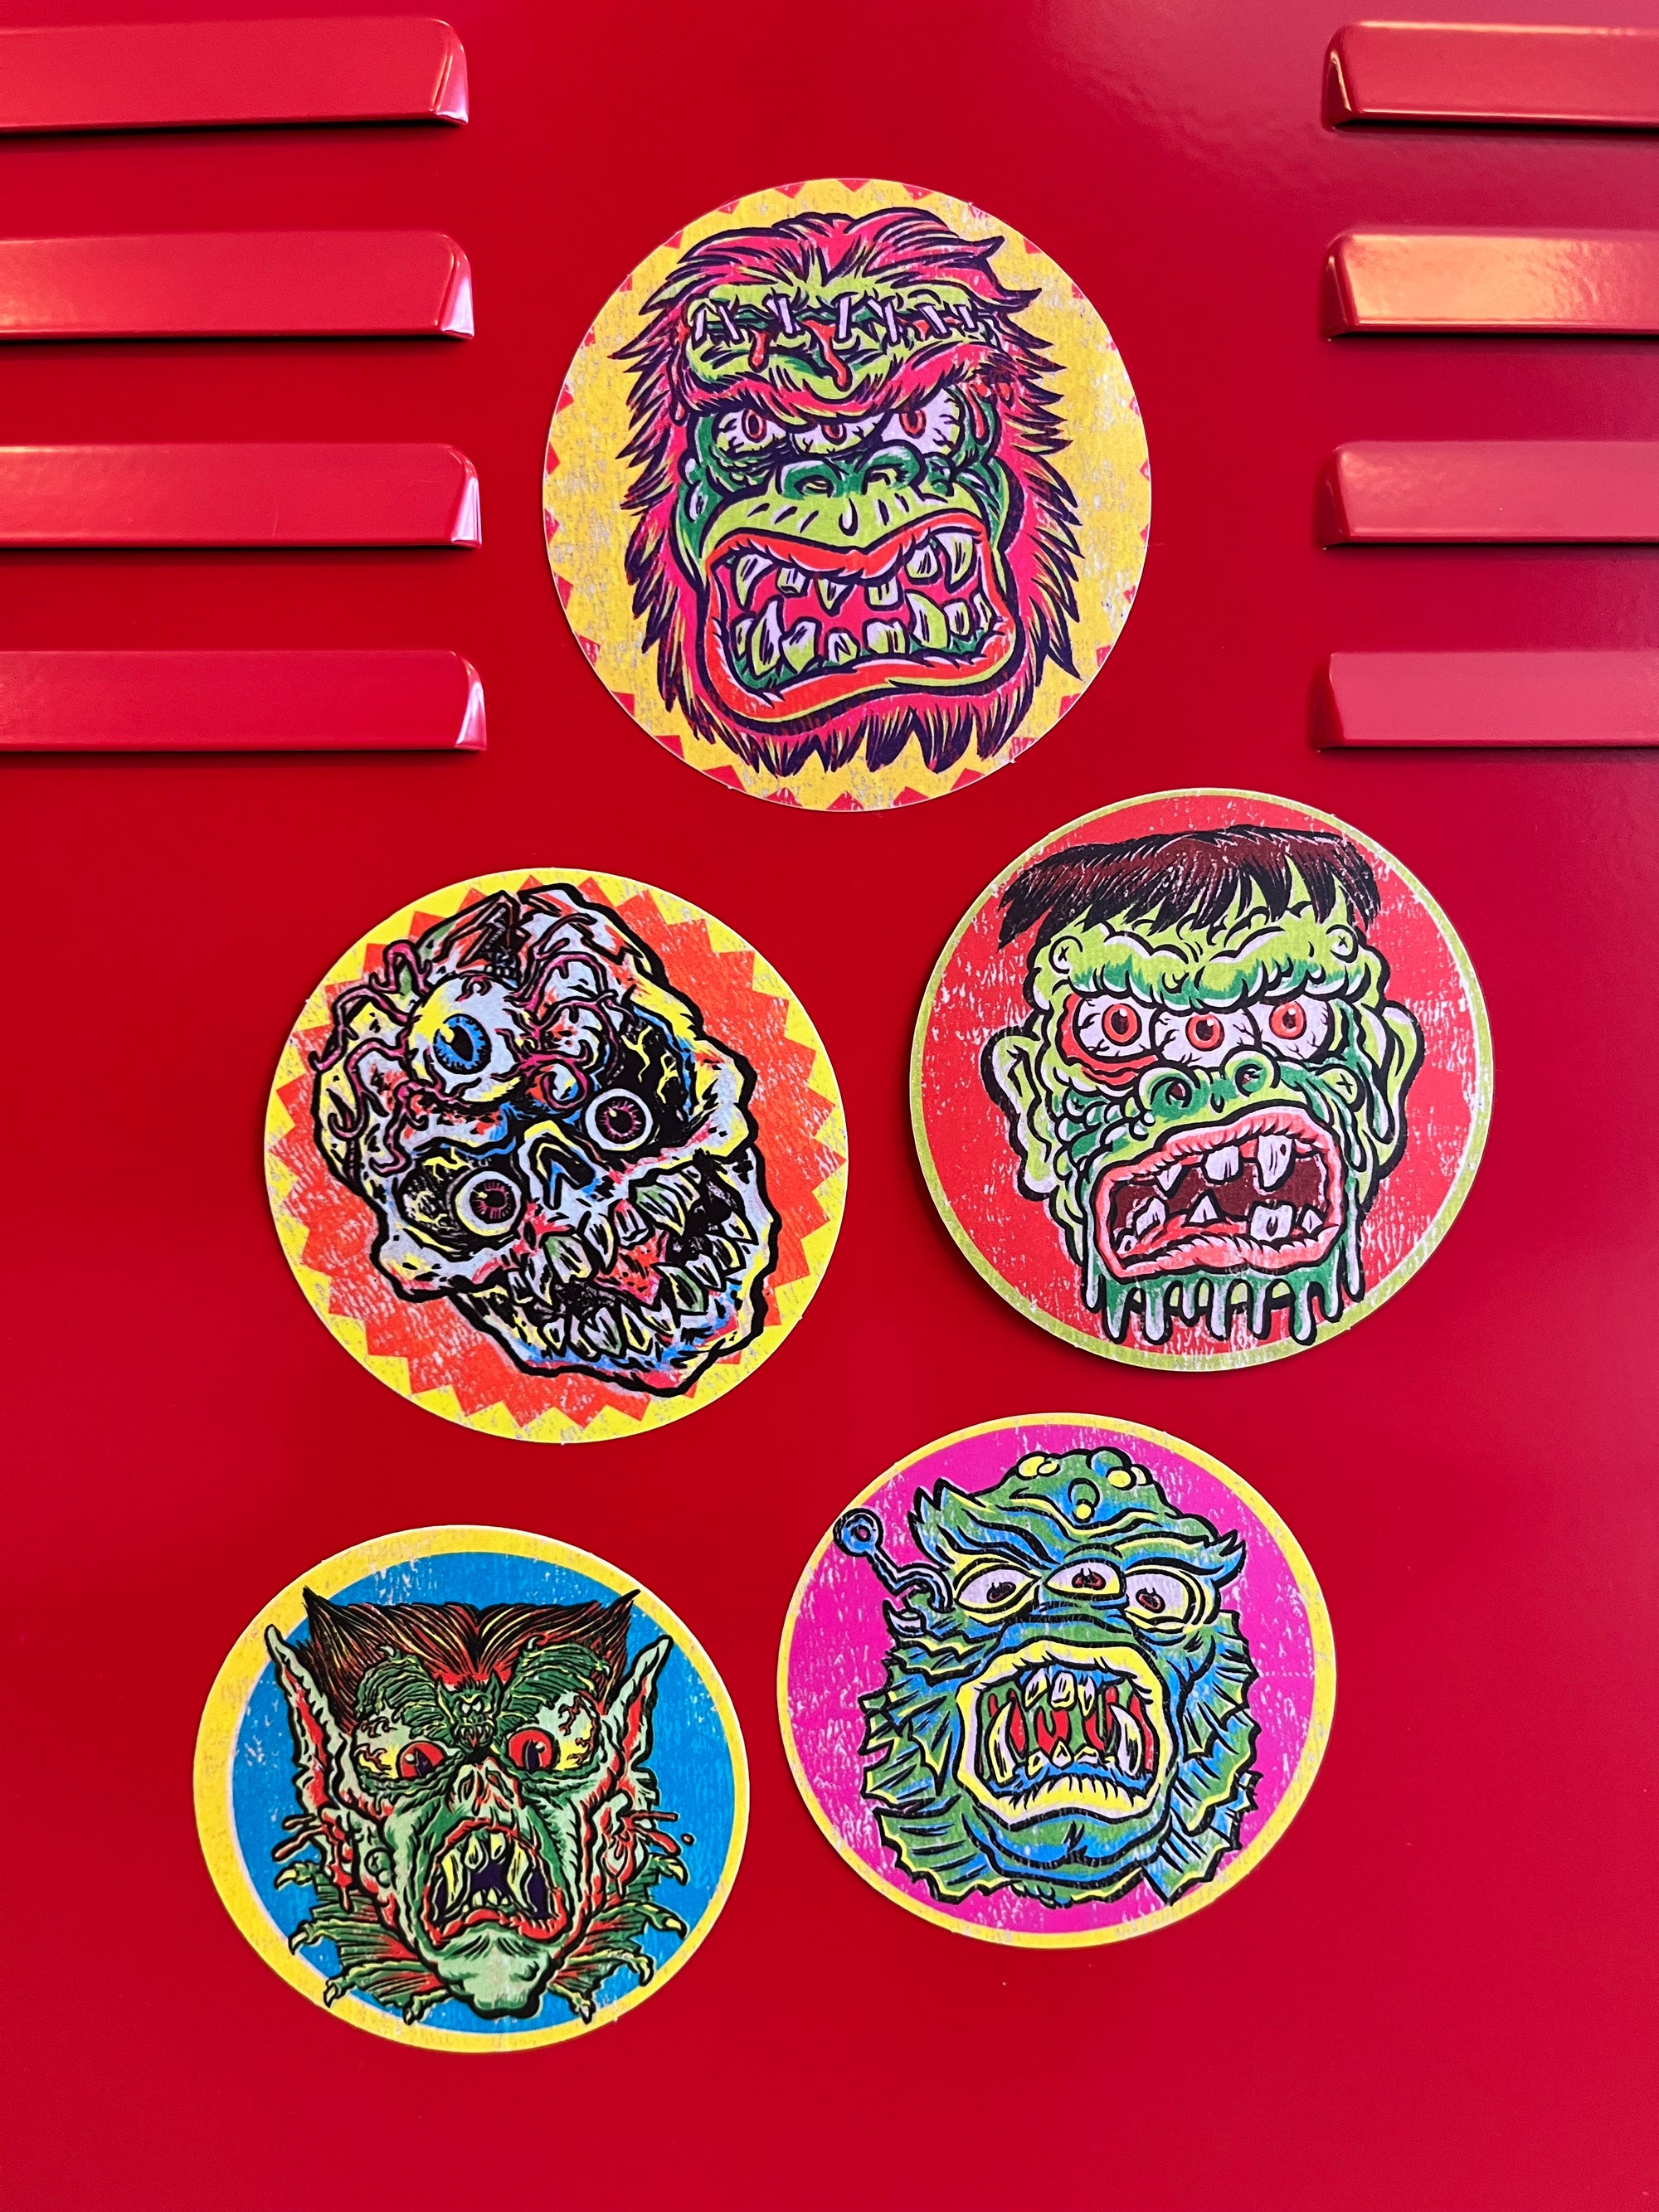 The Ghoulish Guys Sticker Pack!